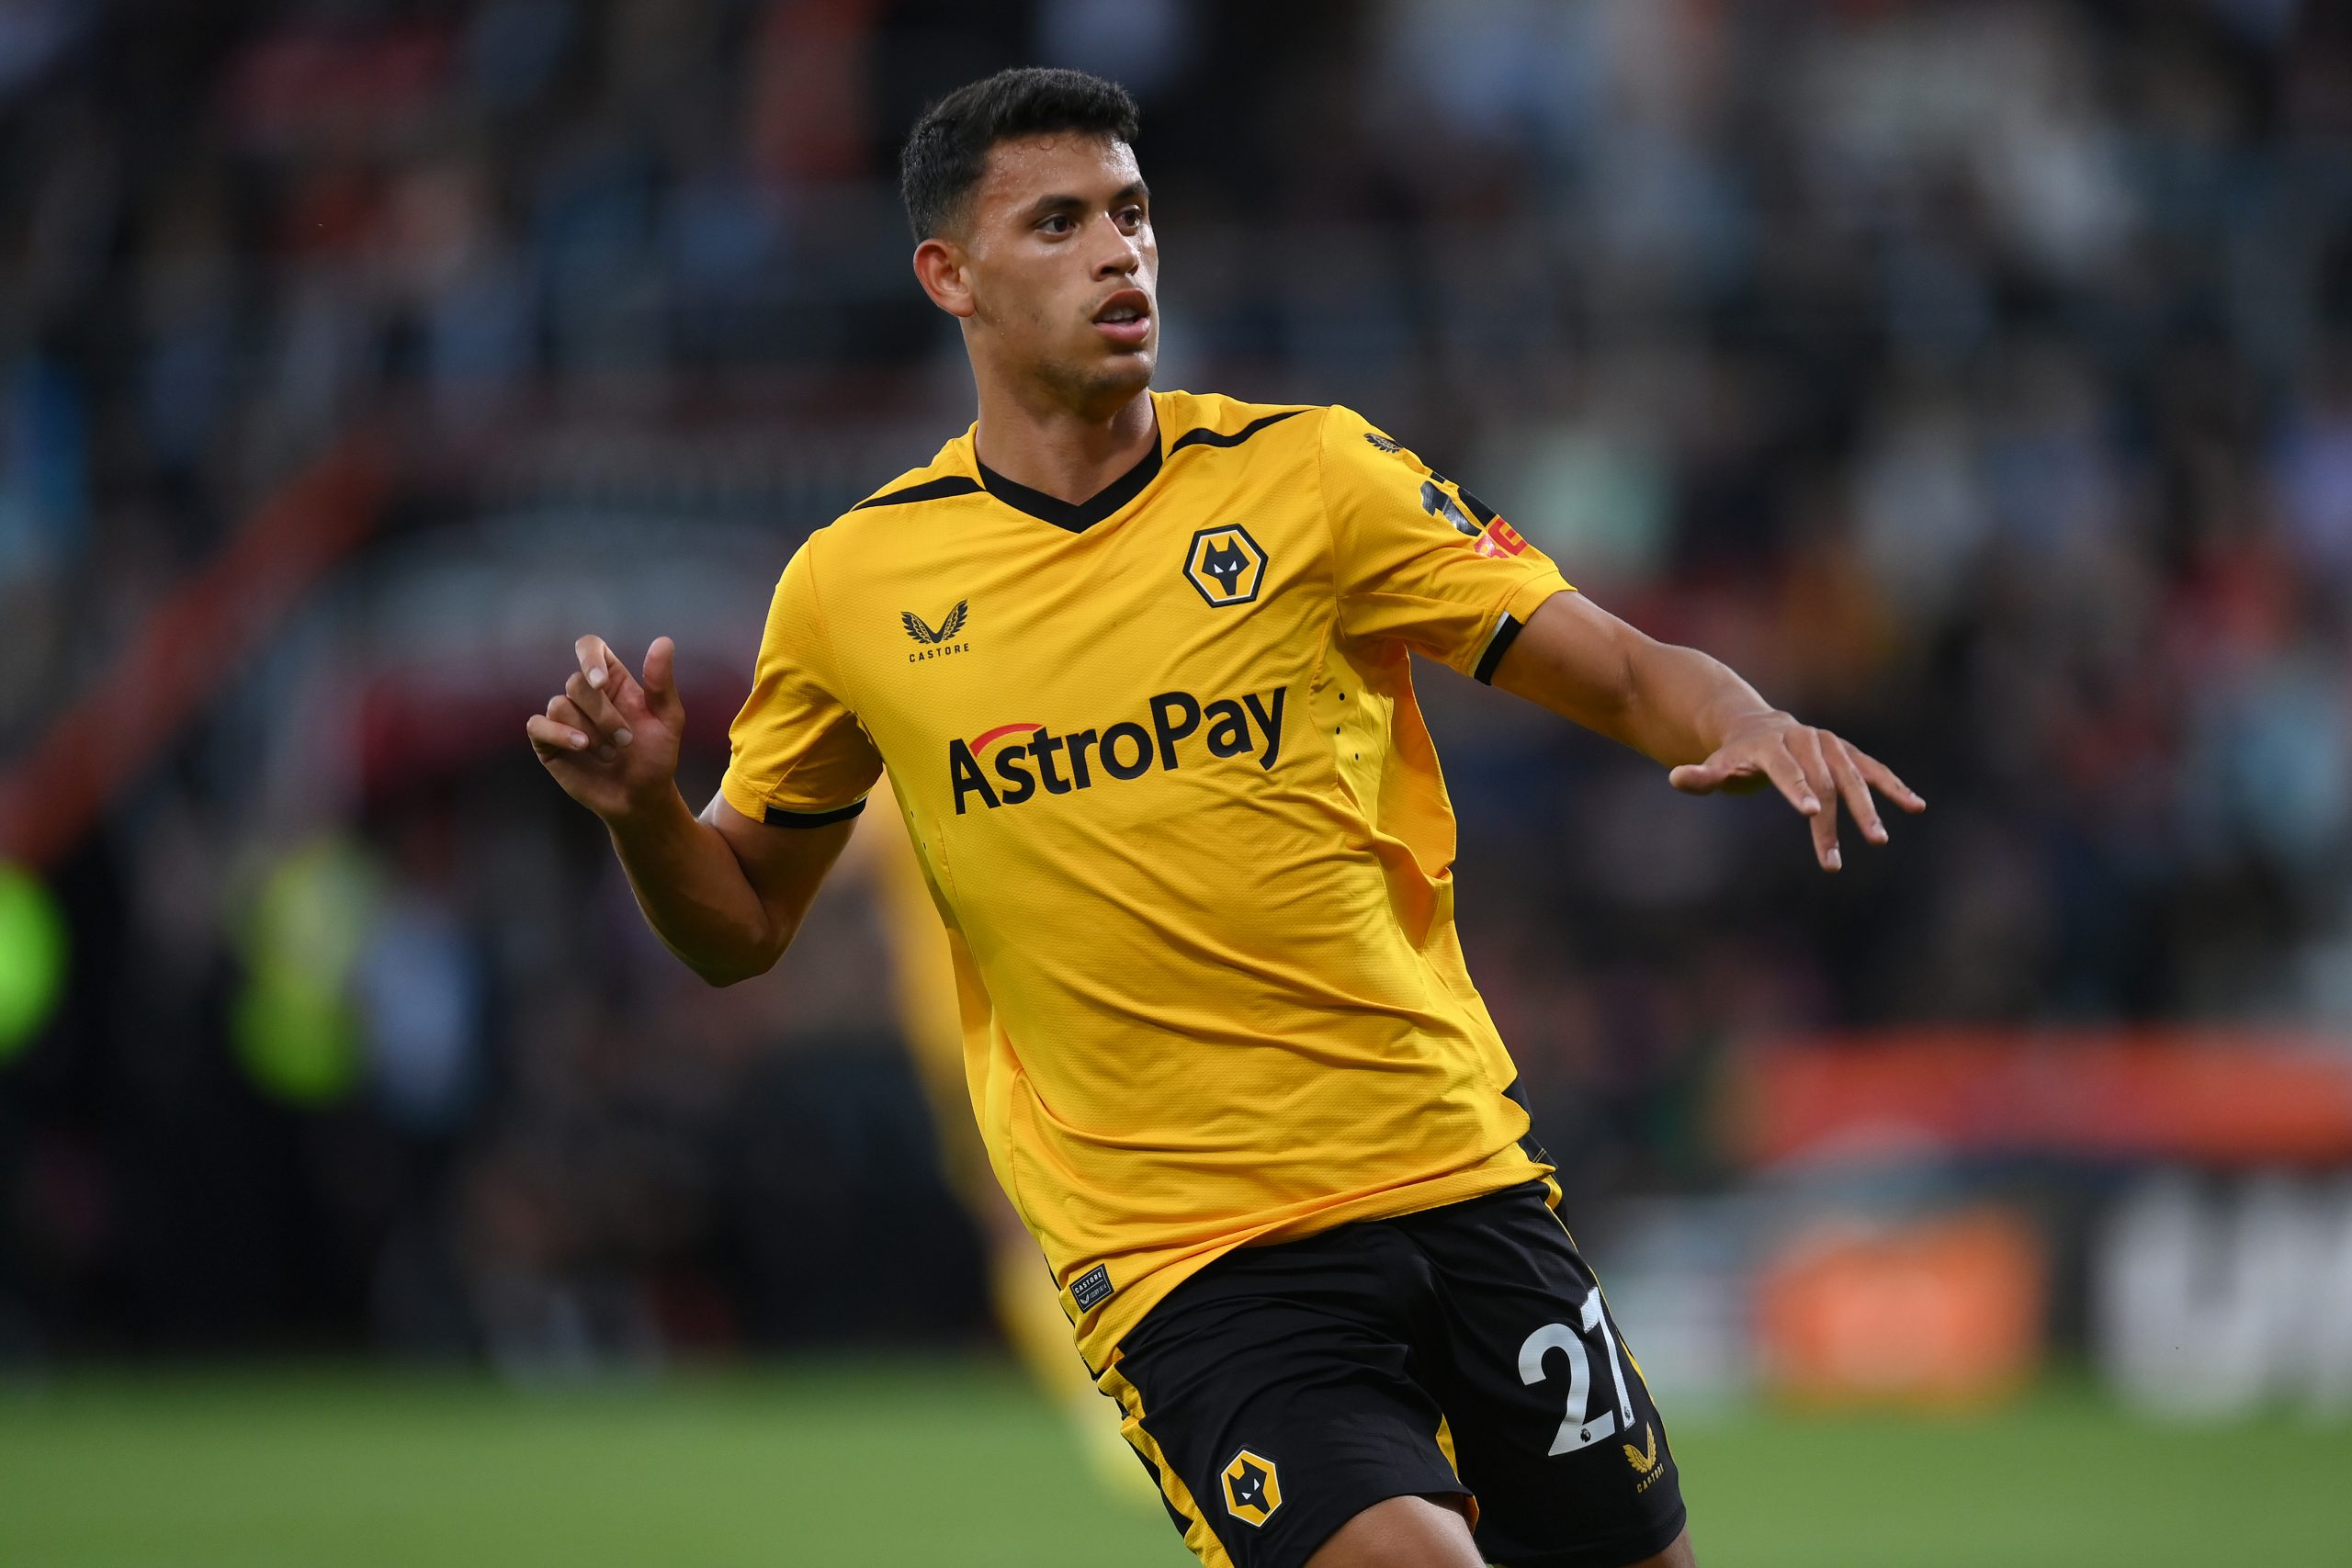 Manchester City make an initial offer to sign Liverpool target and Wolves midfielder Matheus Nunes.